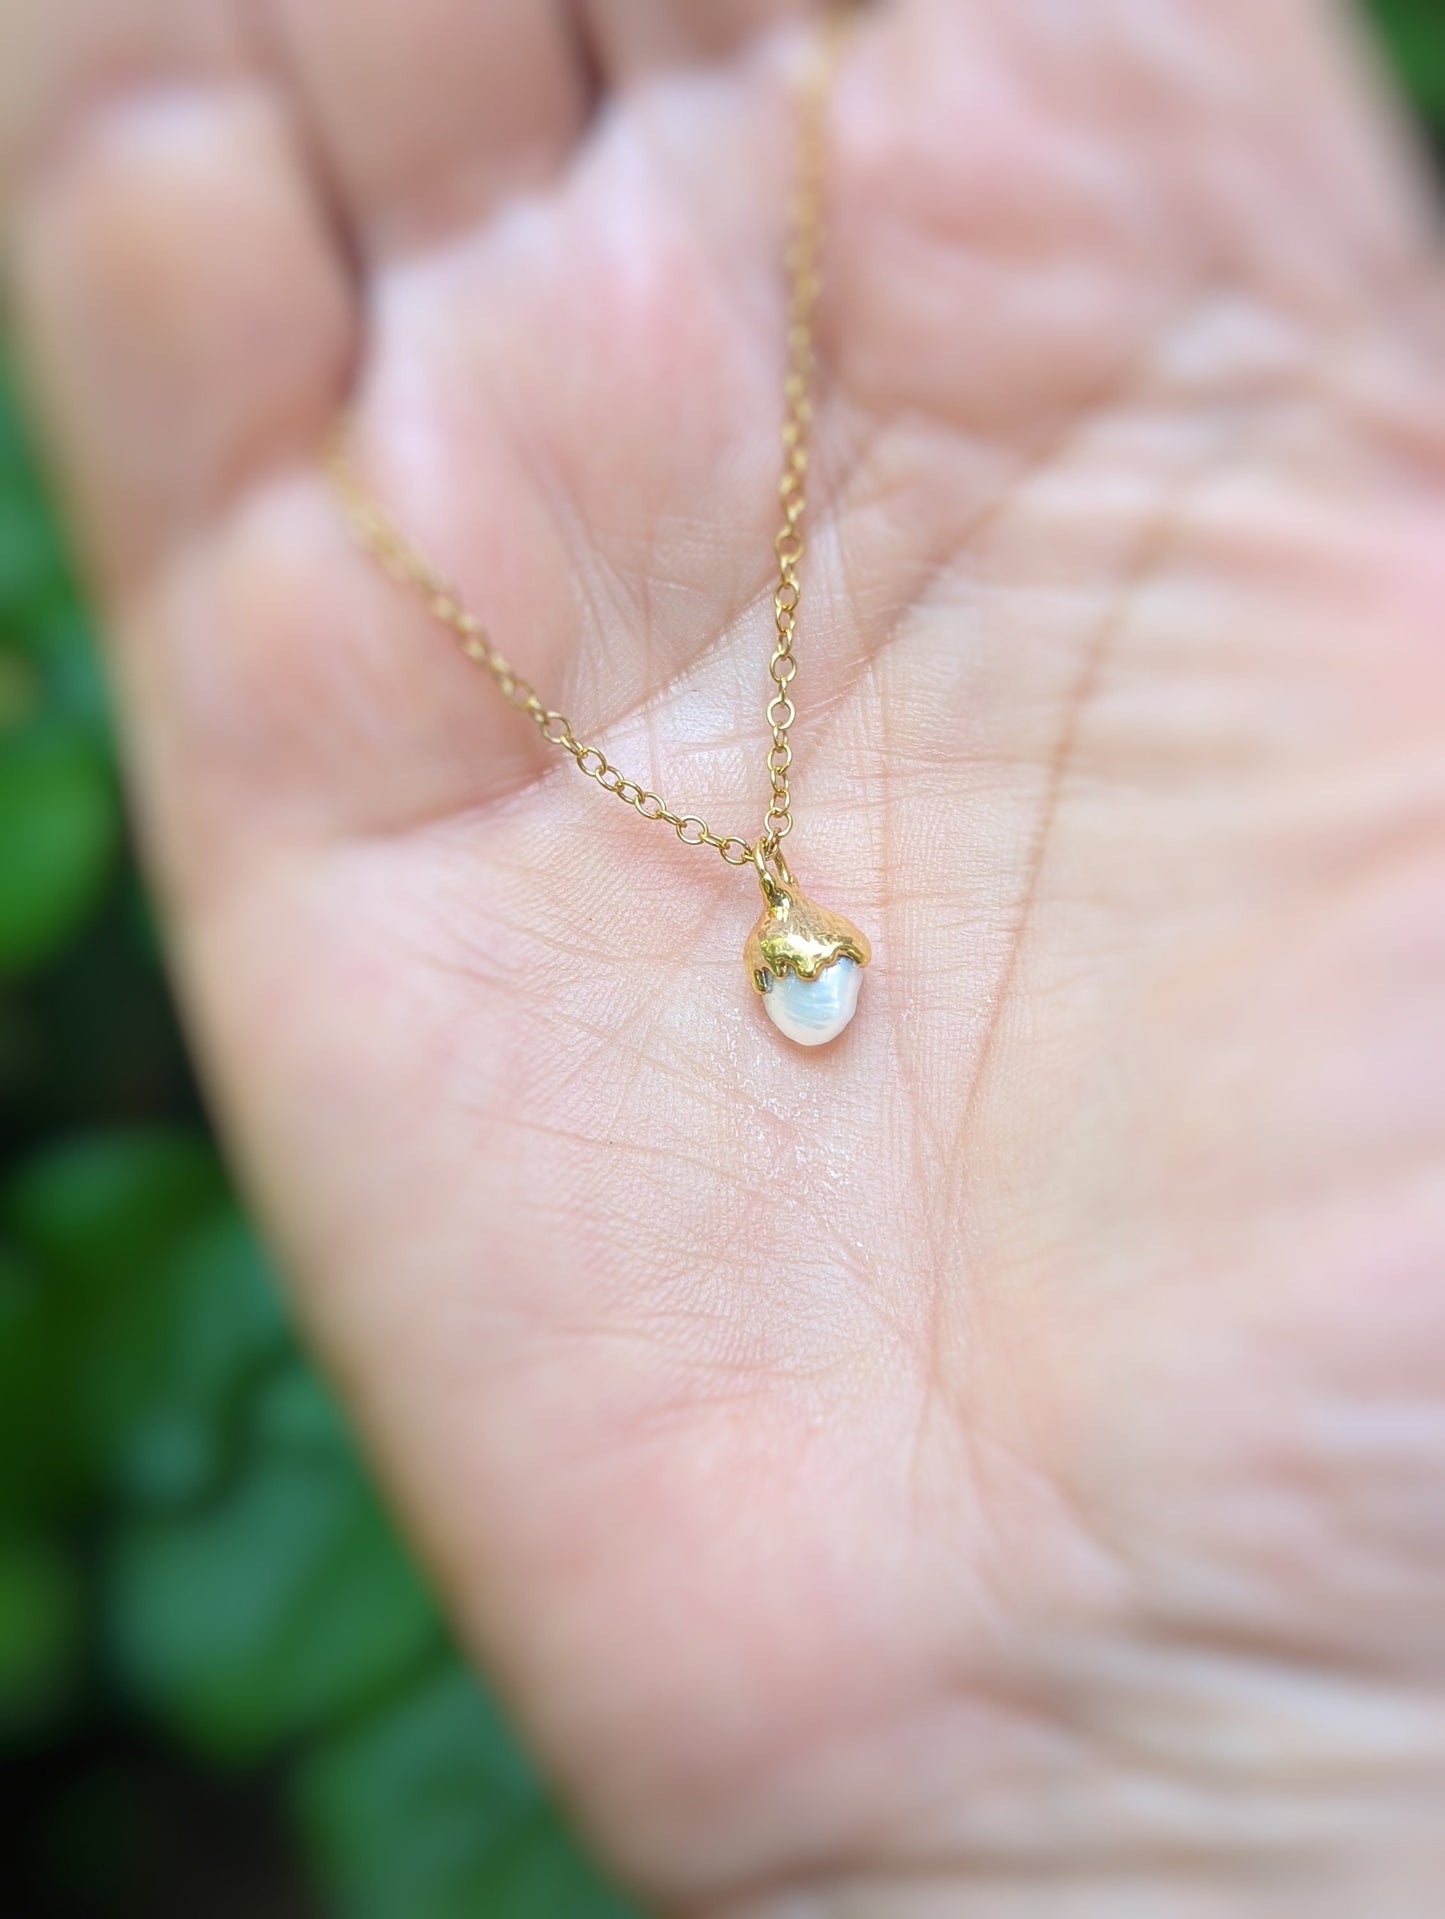 Small dainty Freshwater Pearl necklace in unique 18k Gold setting